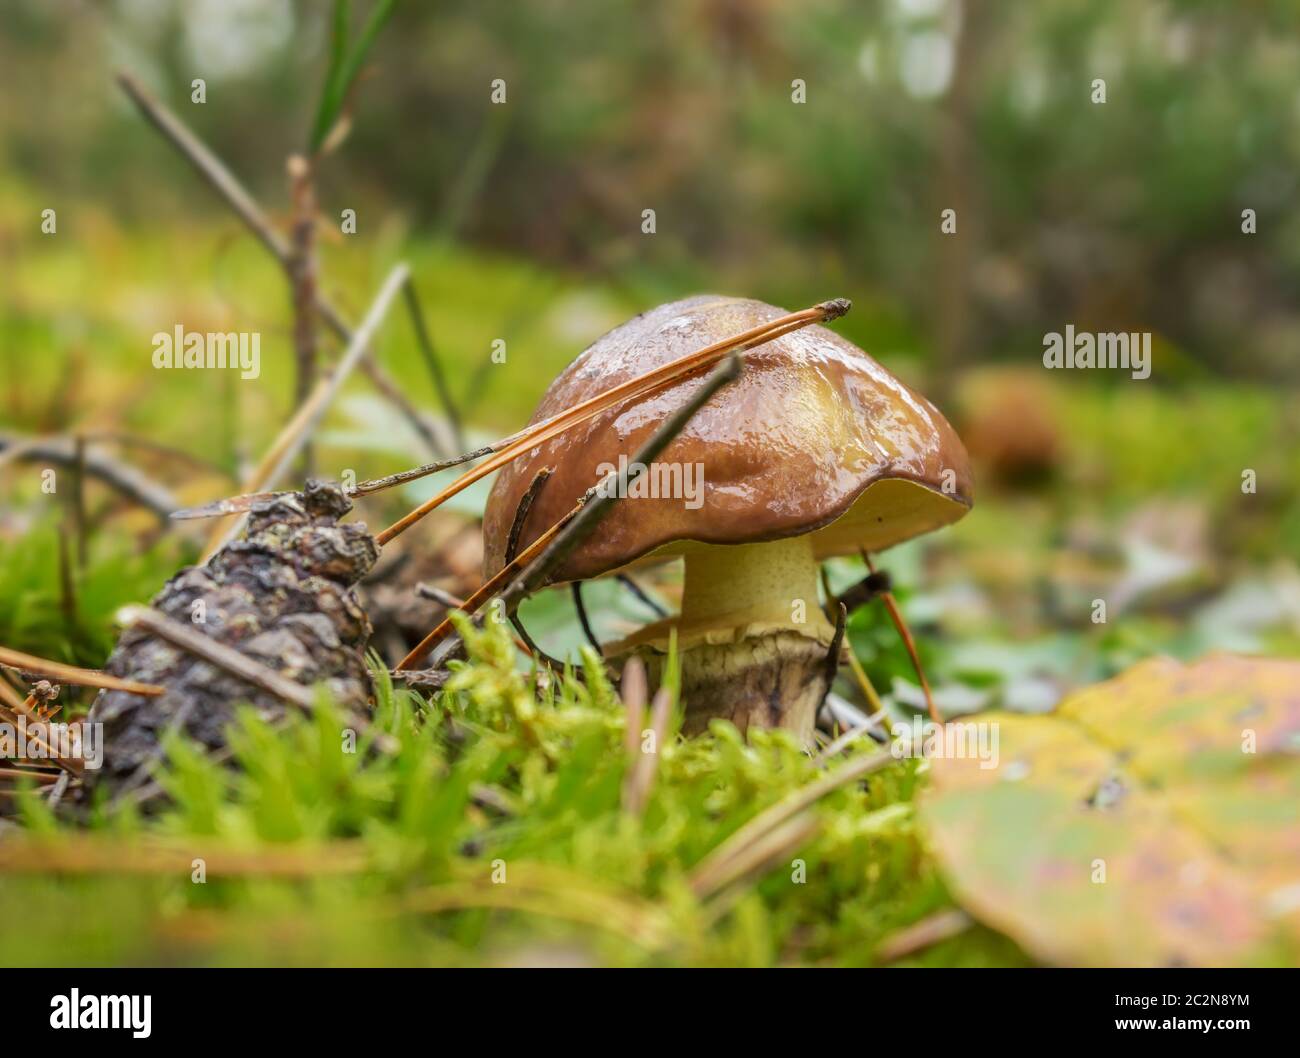 Mushroom greasers (Suillus) on forest clearing Stock Photo